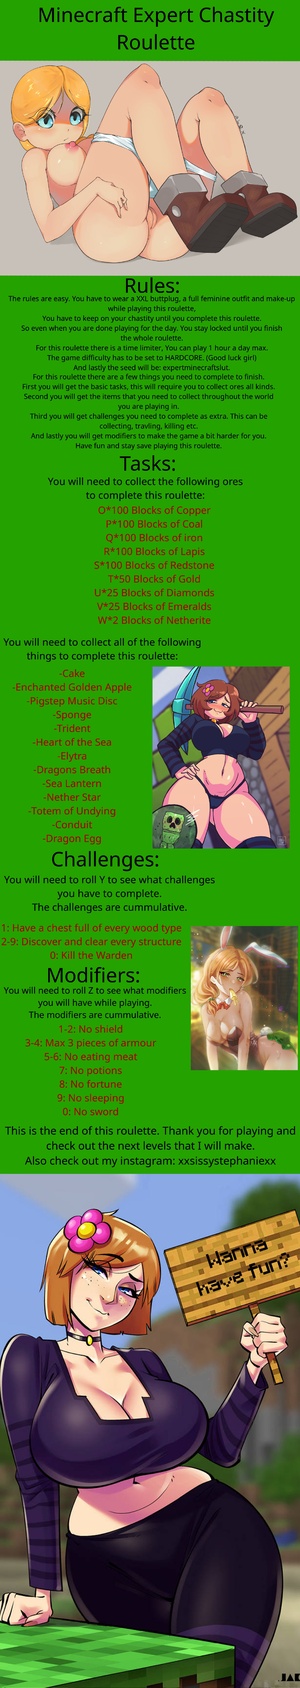 Minecraft Expert Chastity Roulette